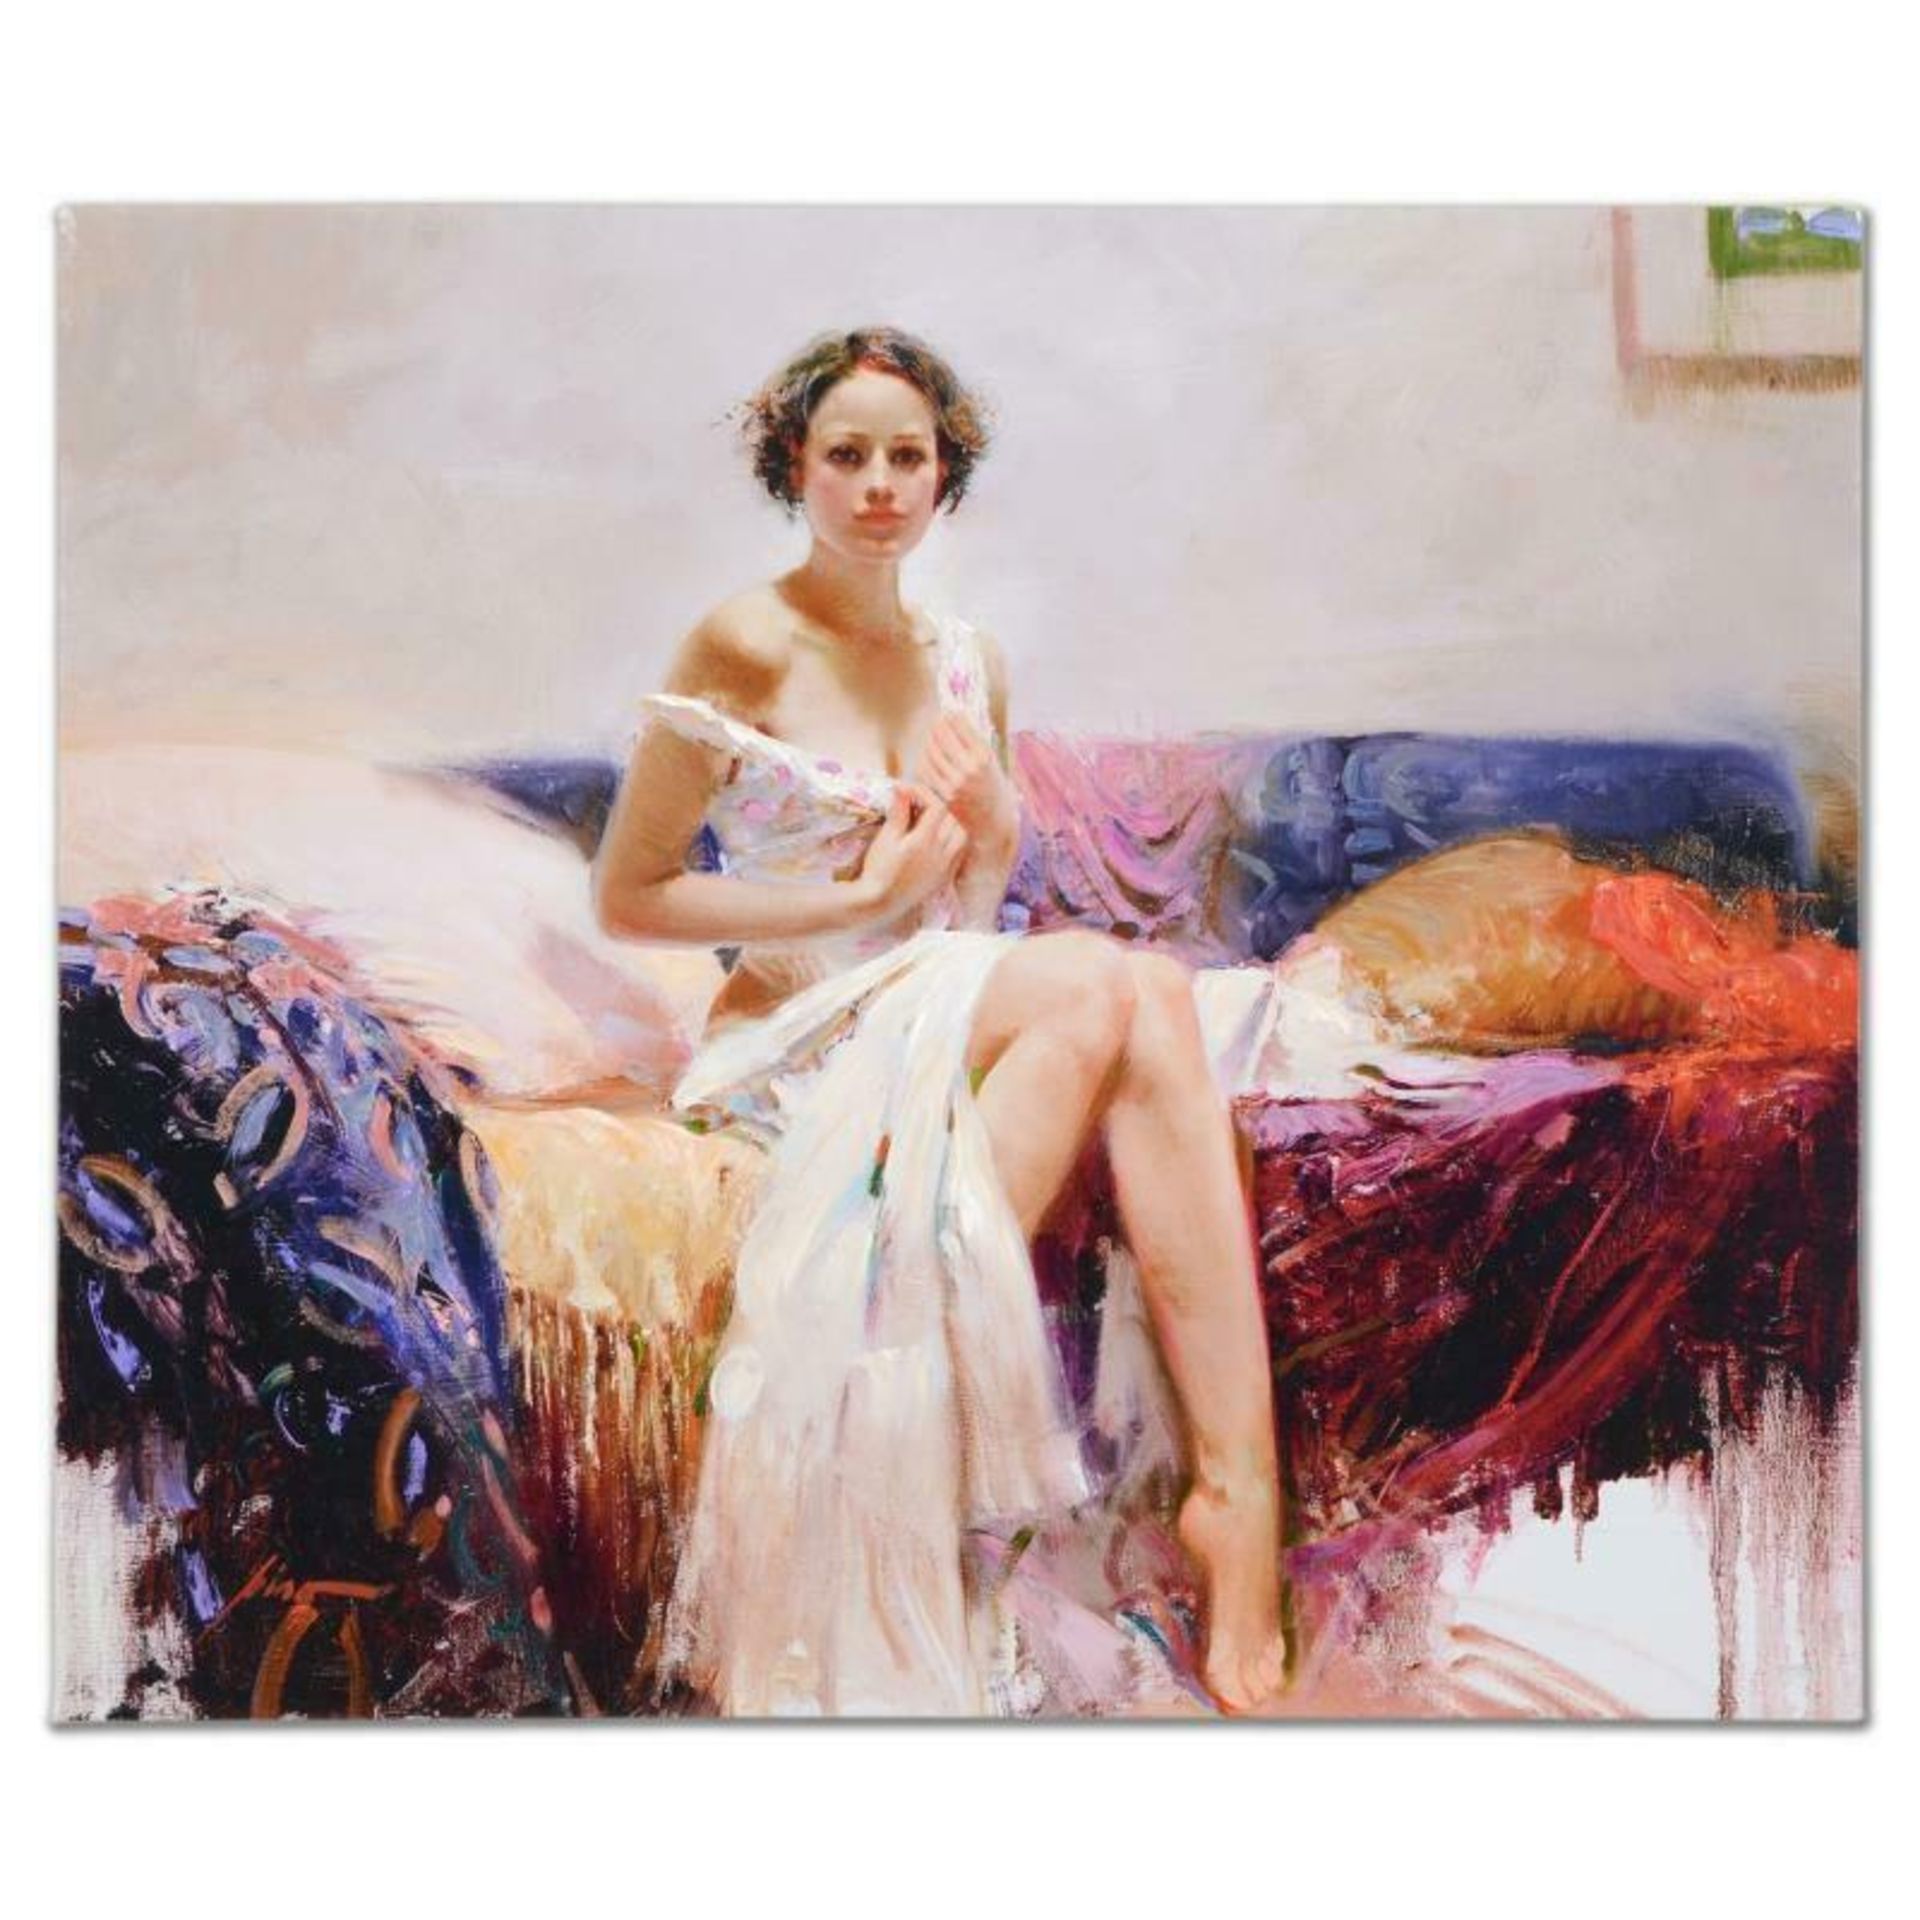 Pino (1939-2010), "Sweet Sensation" Artist Embellished Limited Edition on Canvas